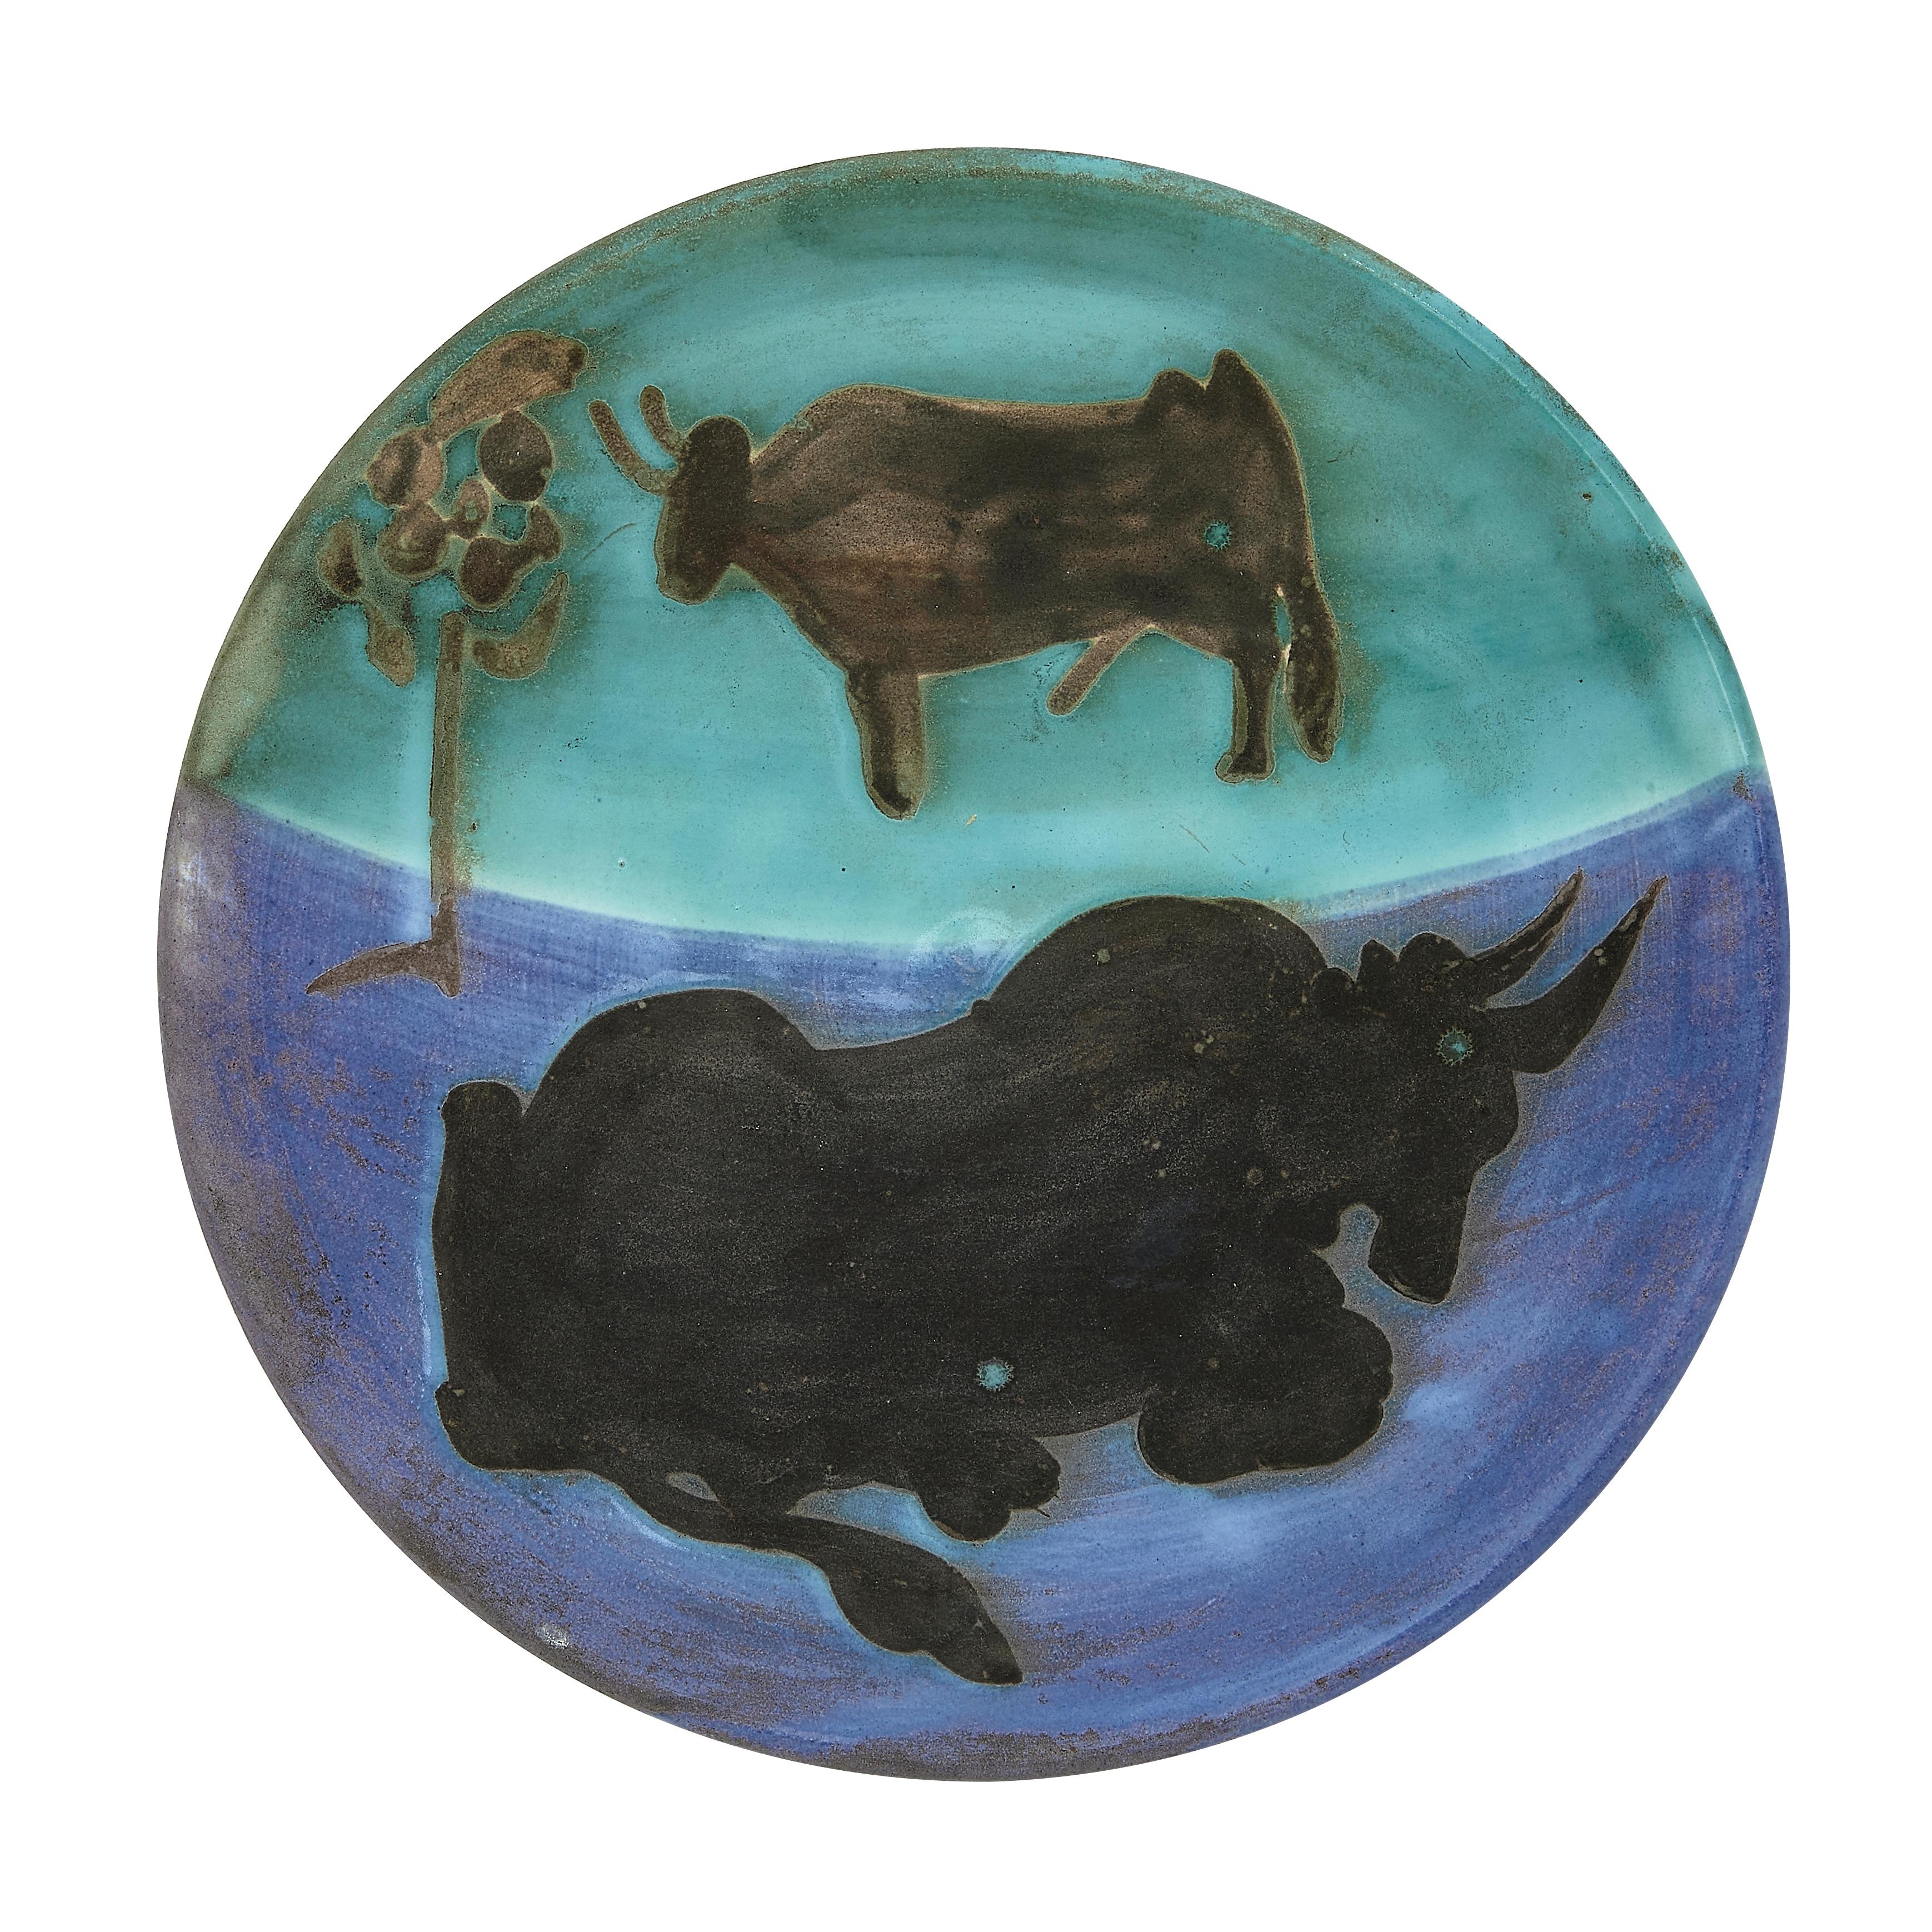 PABLO PICASSO (1881-1973) 
Toros (A. R. 161) 

Terre de faïence plate, 1952, from the edition of 500, incised 'Edition Picasso', partially glazed and painted, with the Edition Picasso and Madoura stamps.